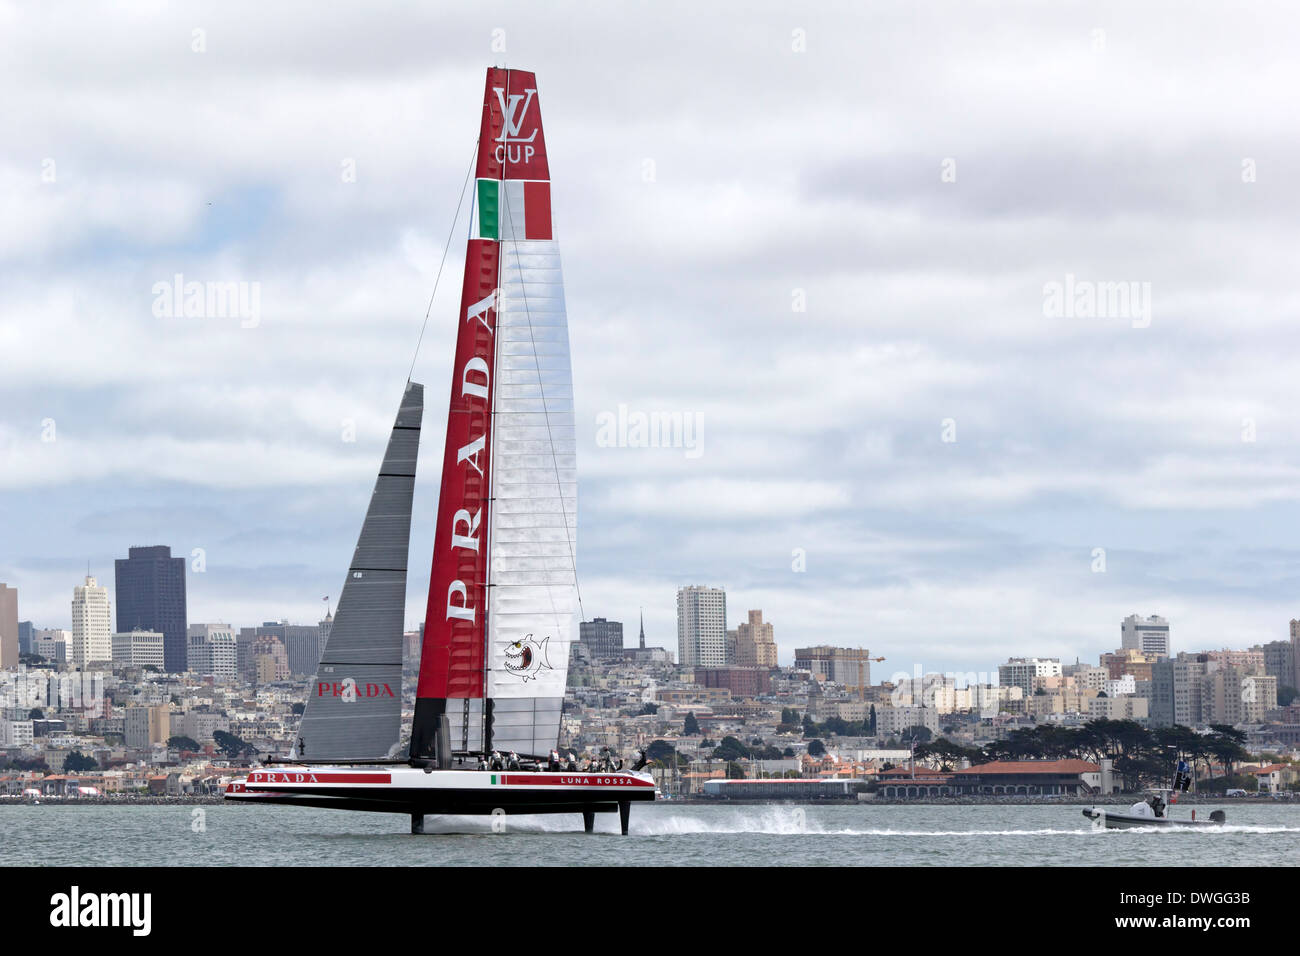 The Luna Rossa Challenge Catamaran races on San Francisco Bay during the 2013 Americas Cup competition. Stock Photo